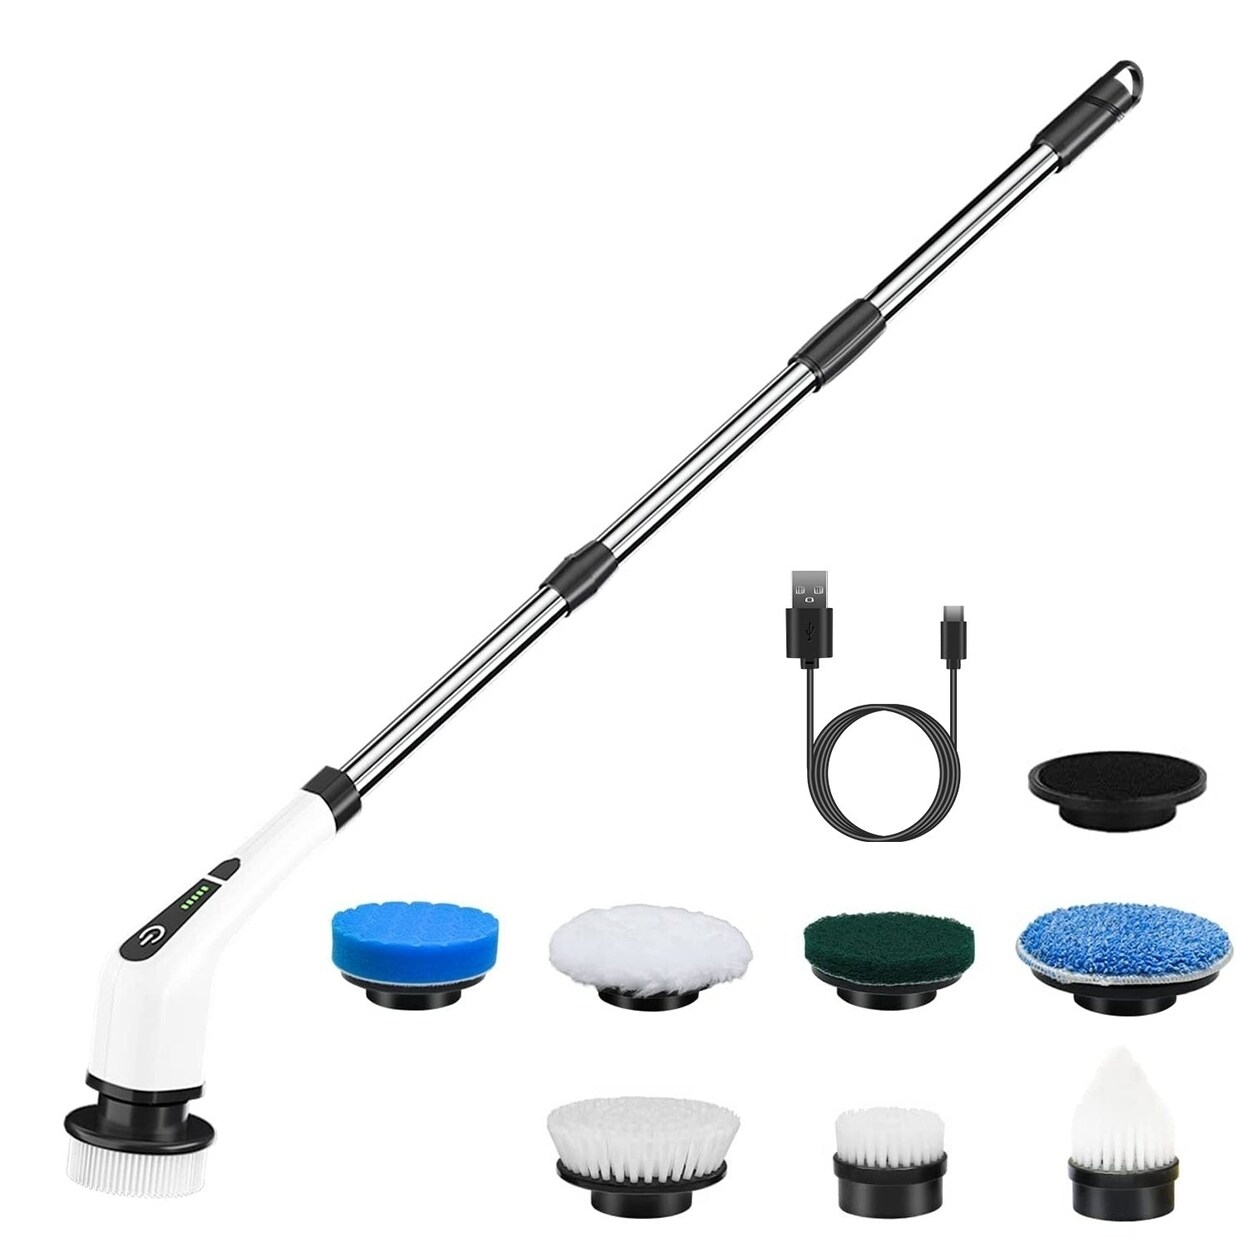 SKUSHOPS Electric Spin Scrubber Cordless Rechargeable Telescopic Cleaning Brush 8 Replaceable Heads 2 Speed Adjustable Extension